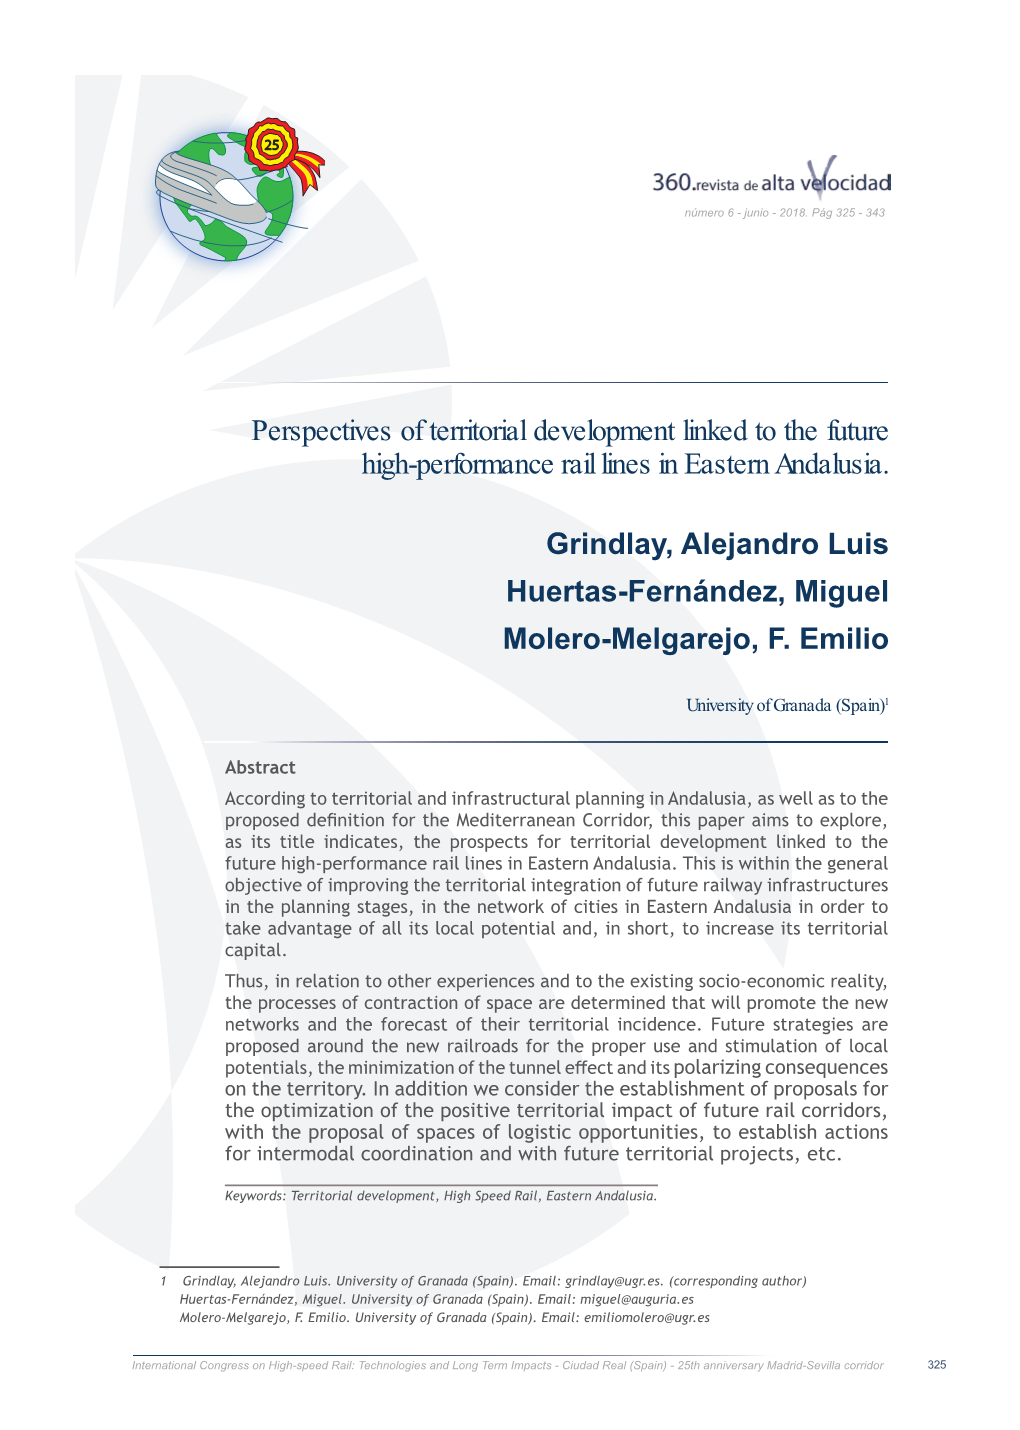 Perspectives of Territorial Development Linked to the Future High-Performance Rail Lines in Eastern Andalusia